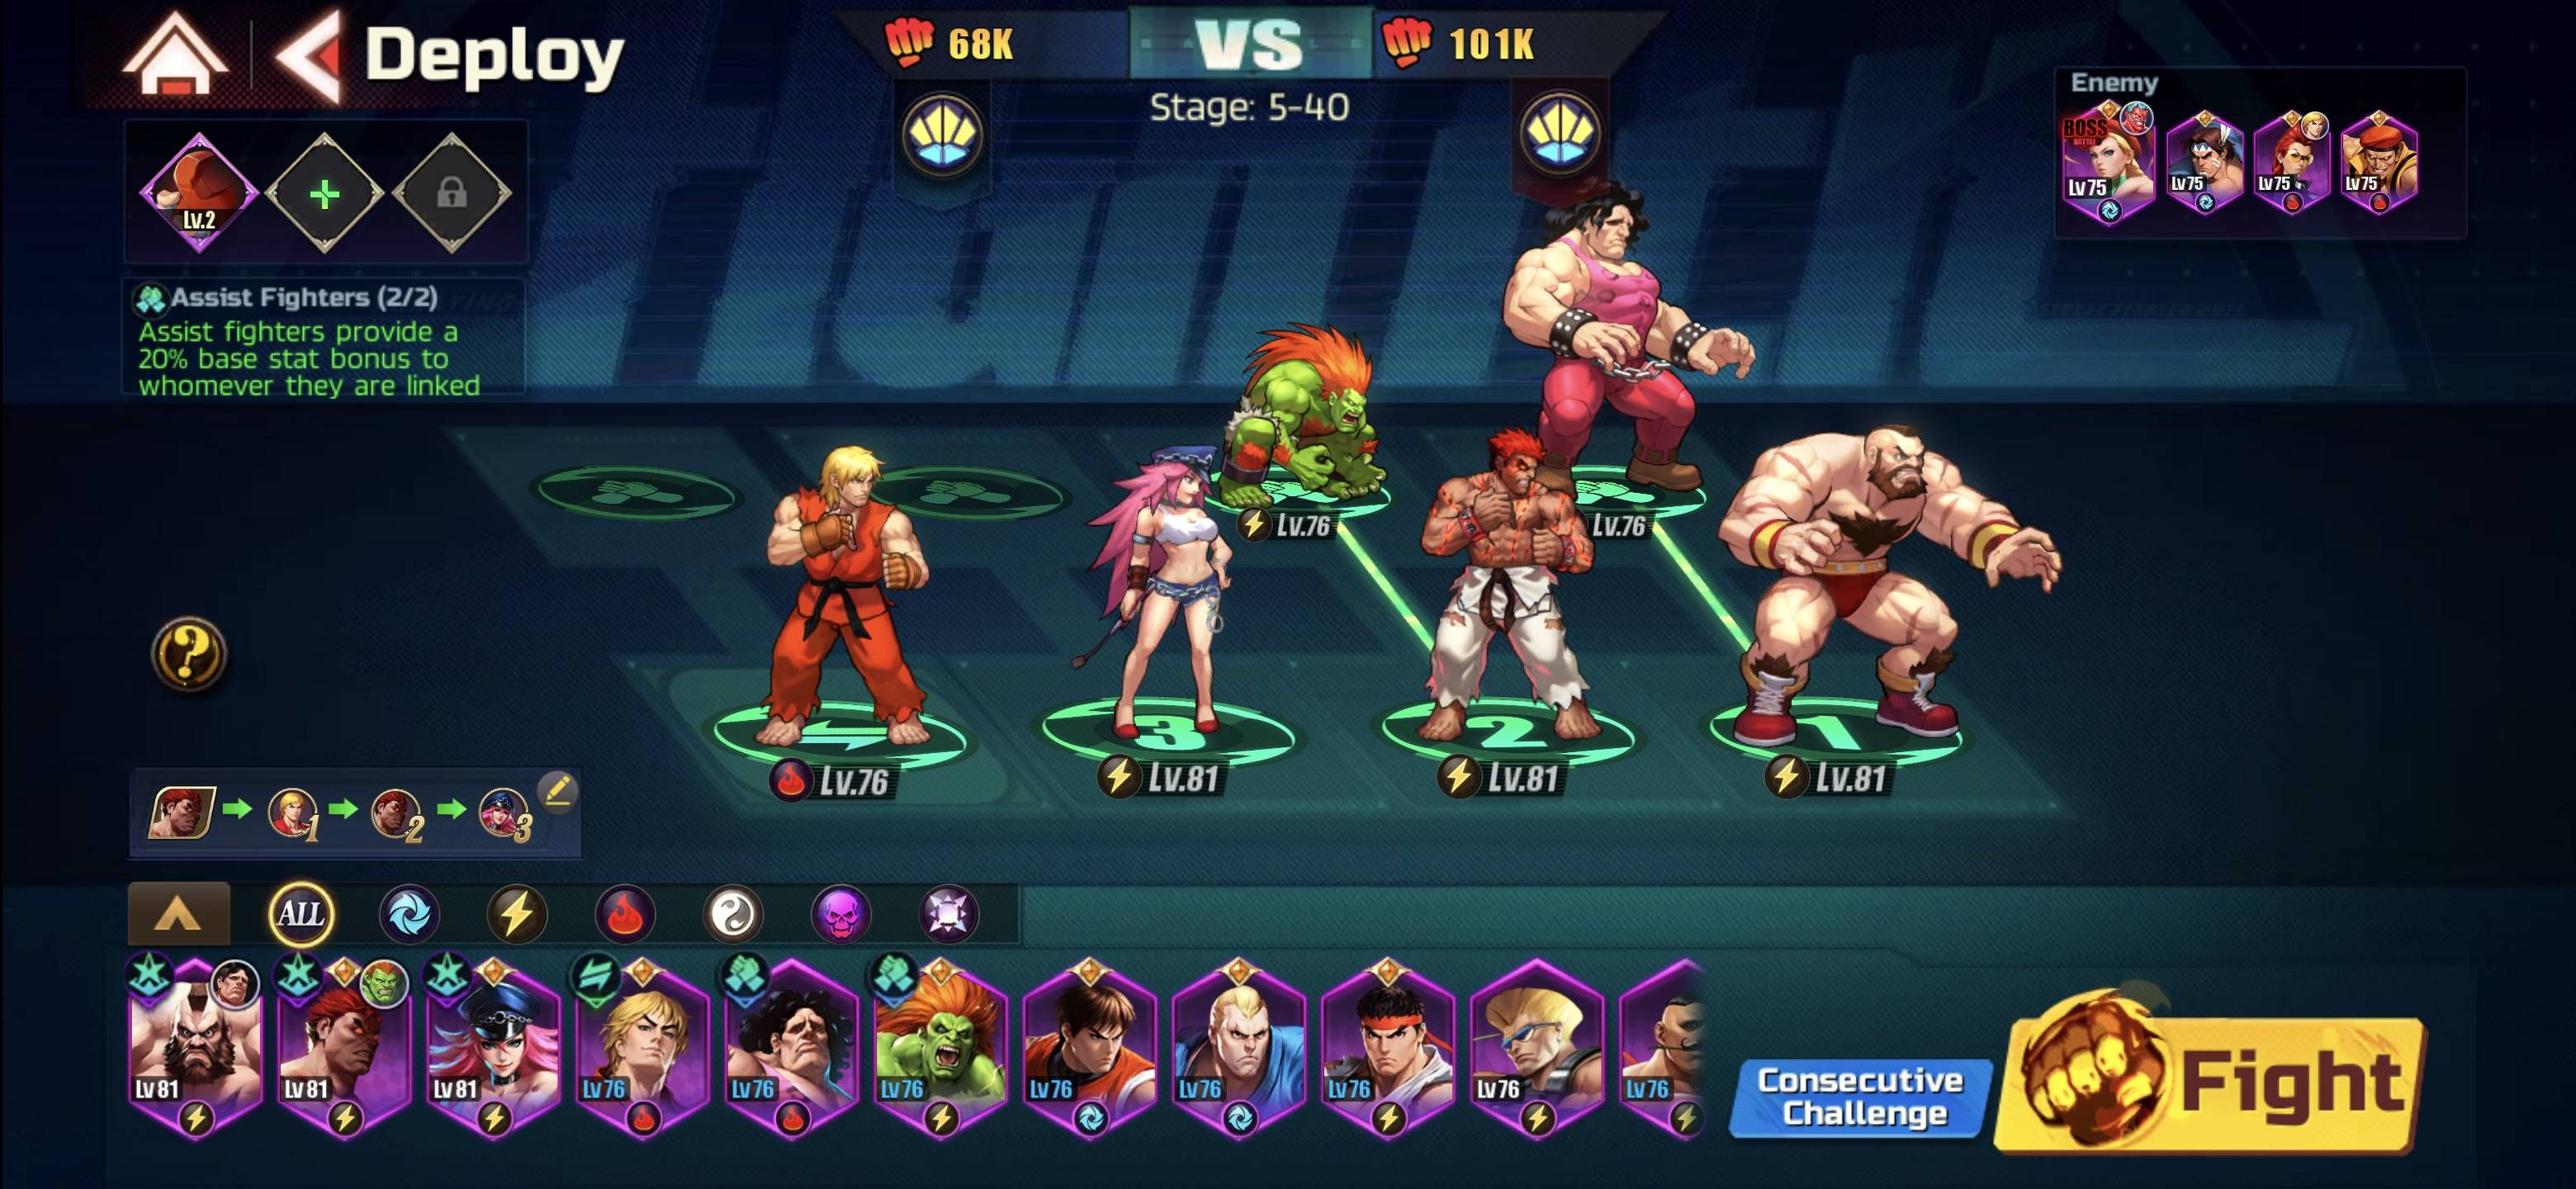 Street Fighter: Duel's layout screen shows the team of Zangief, Mad Ryu, and Poison replacing Ken, with Hugo and Blanka supporting them.